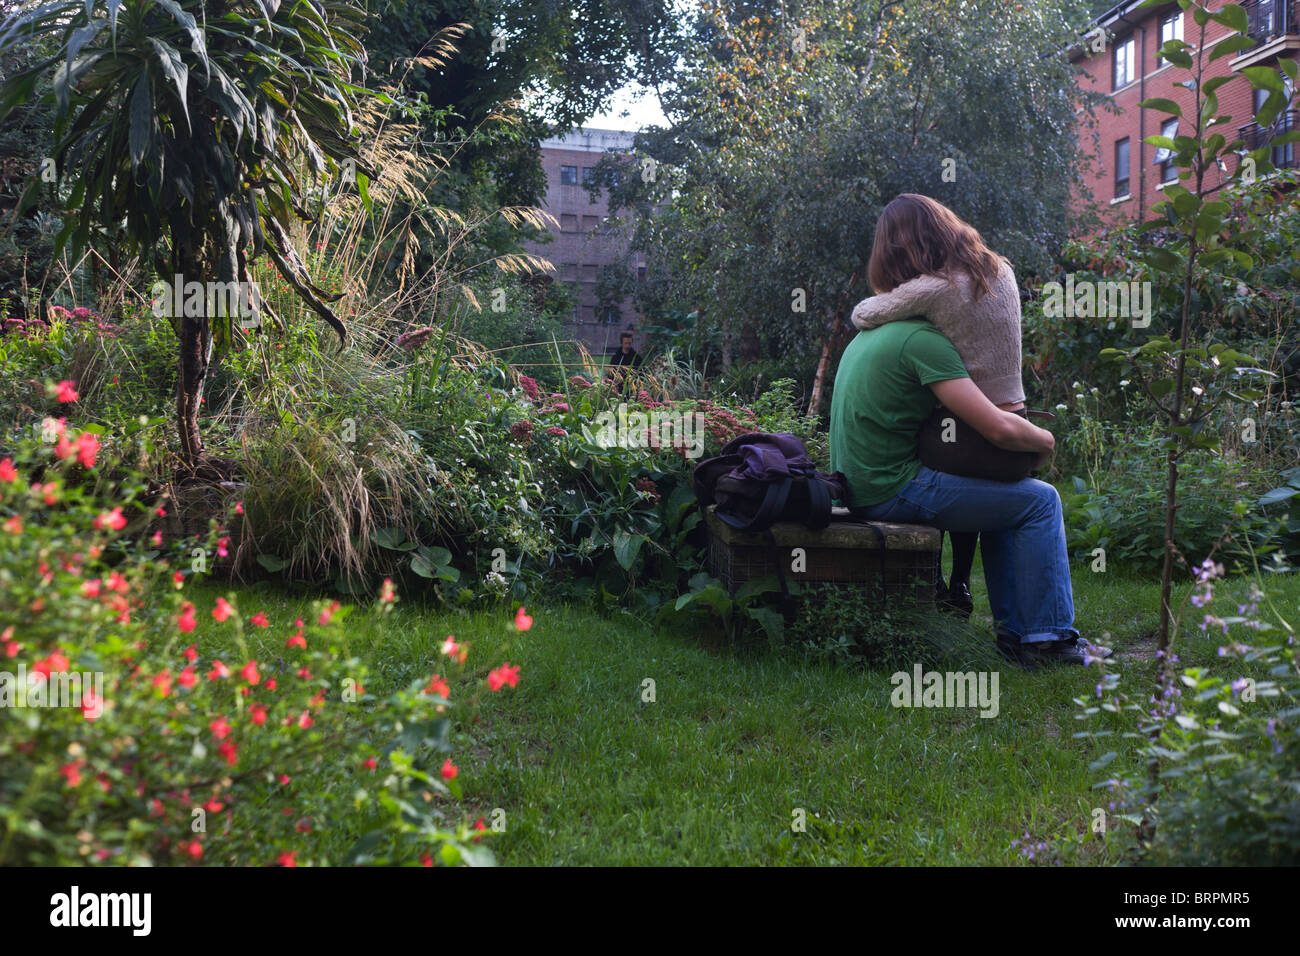 As two young lovers cuddle intimately in Phoenix Gardens, a voyeuristic stranger seemingly looks through bushes. Stock Photo